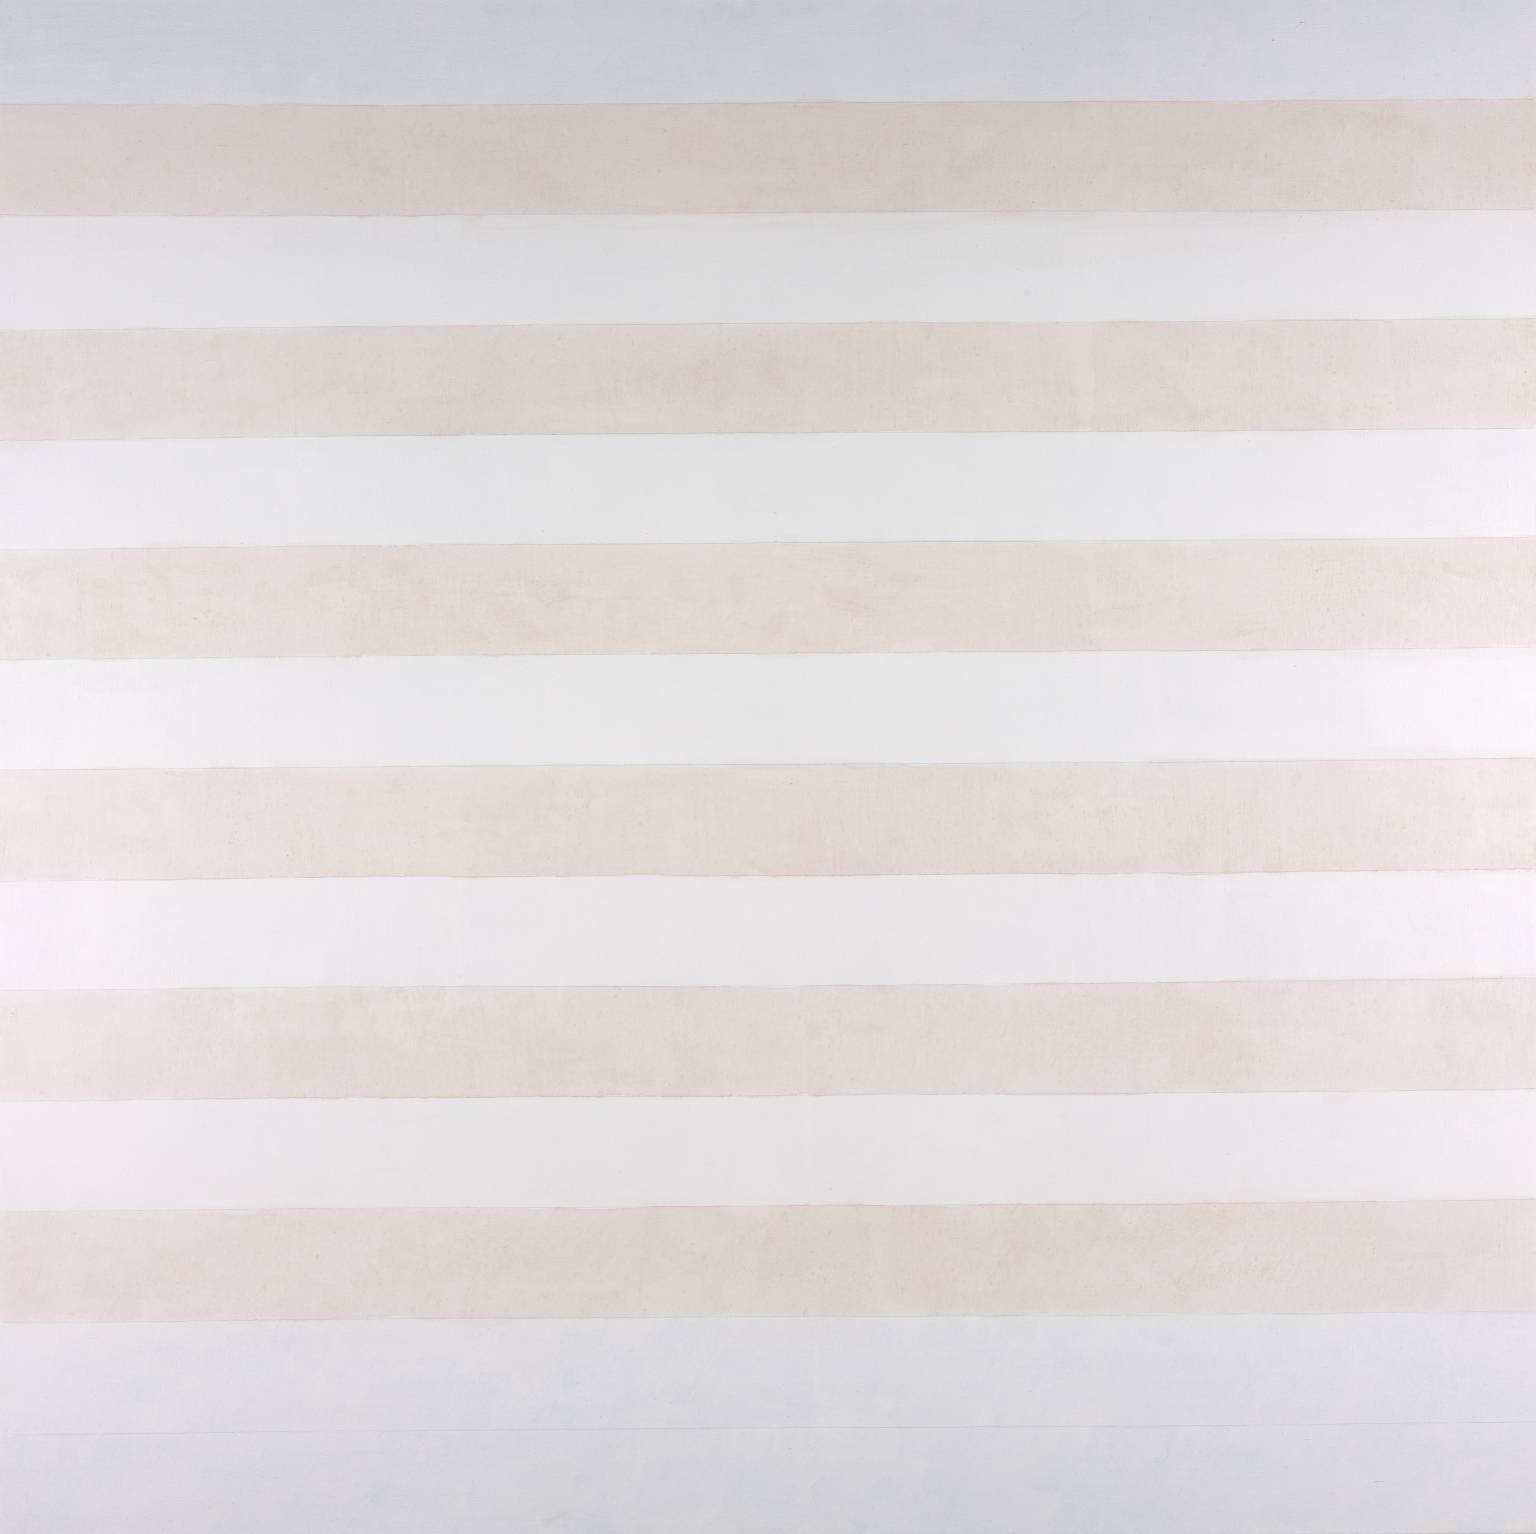 Happy Holiday by Agnes Martin, 1999.